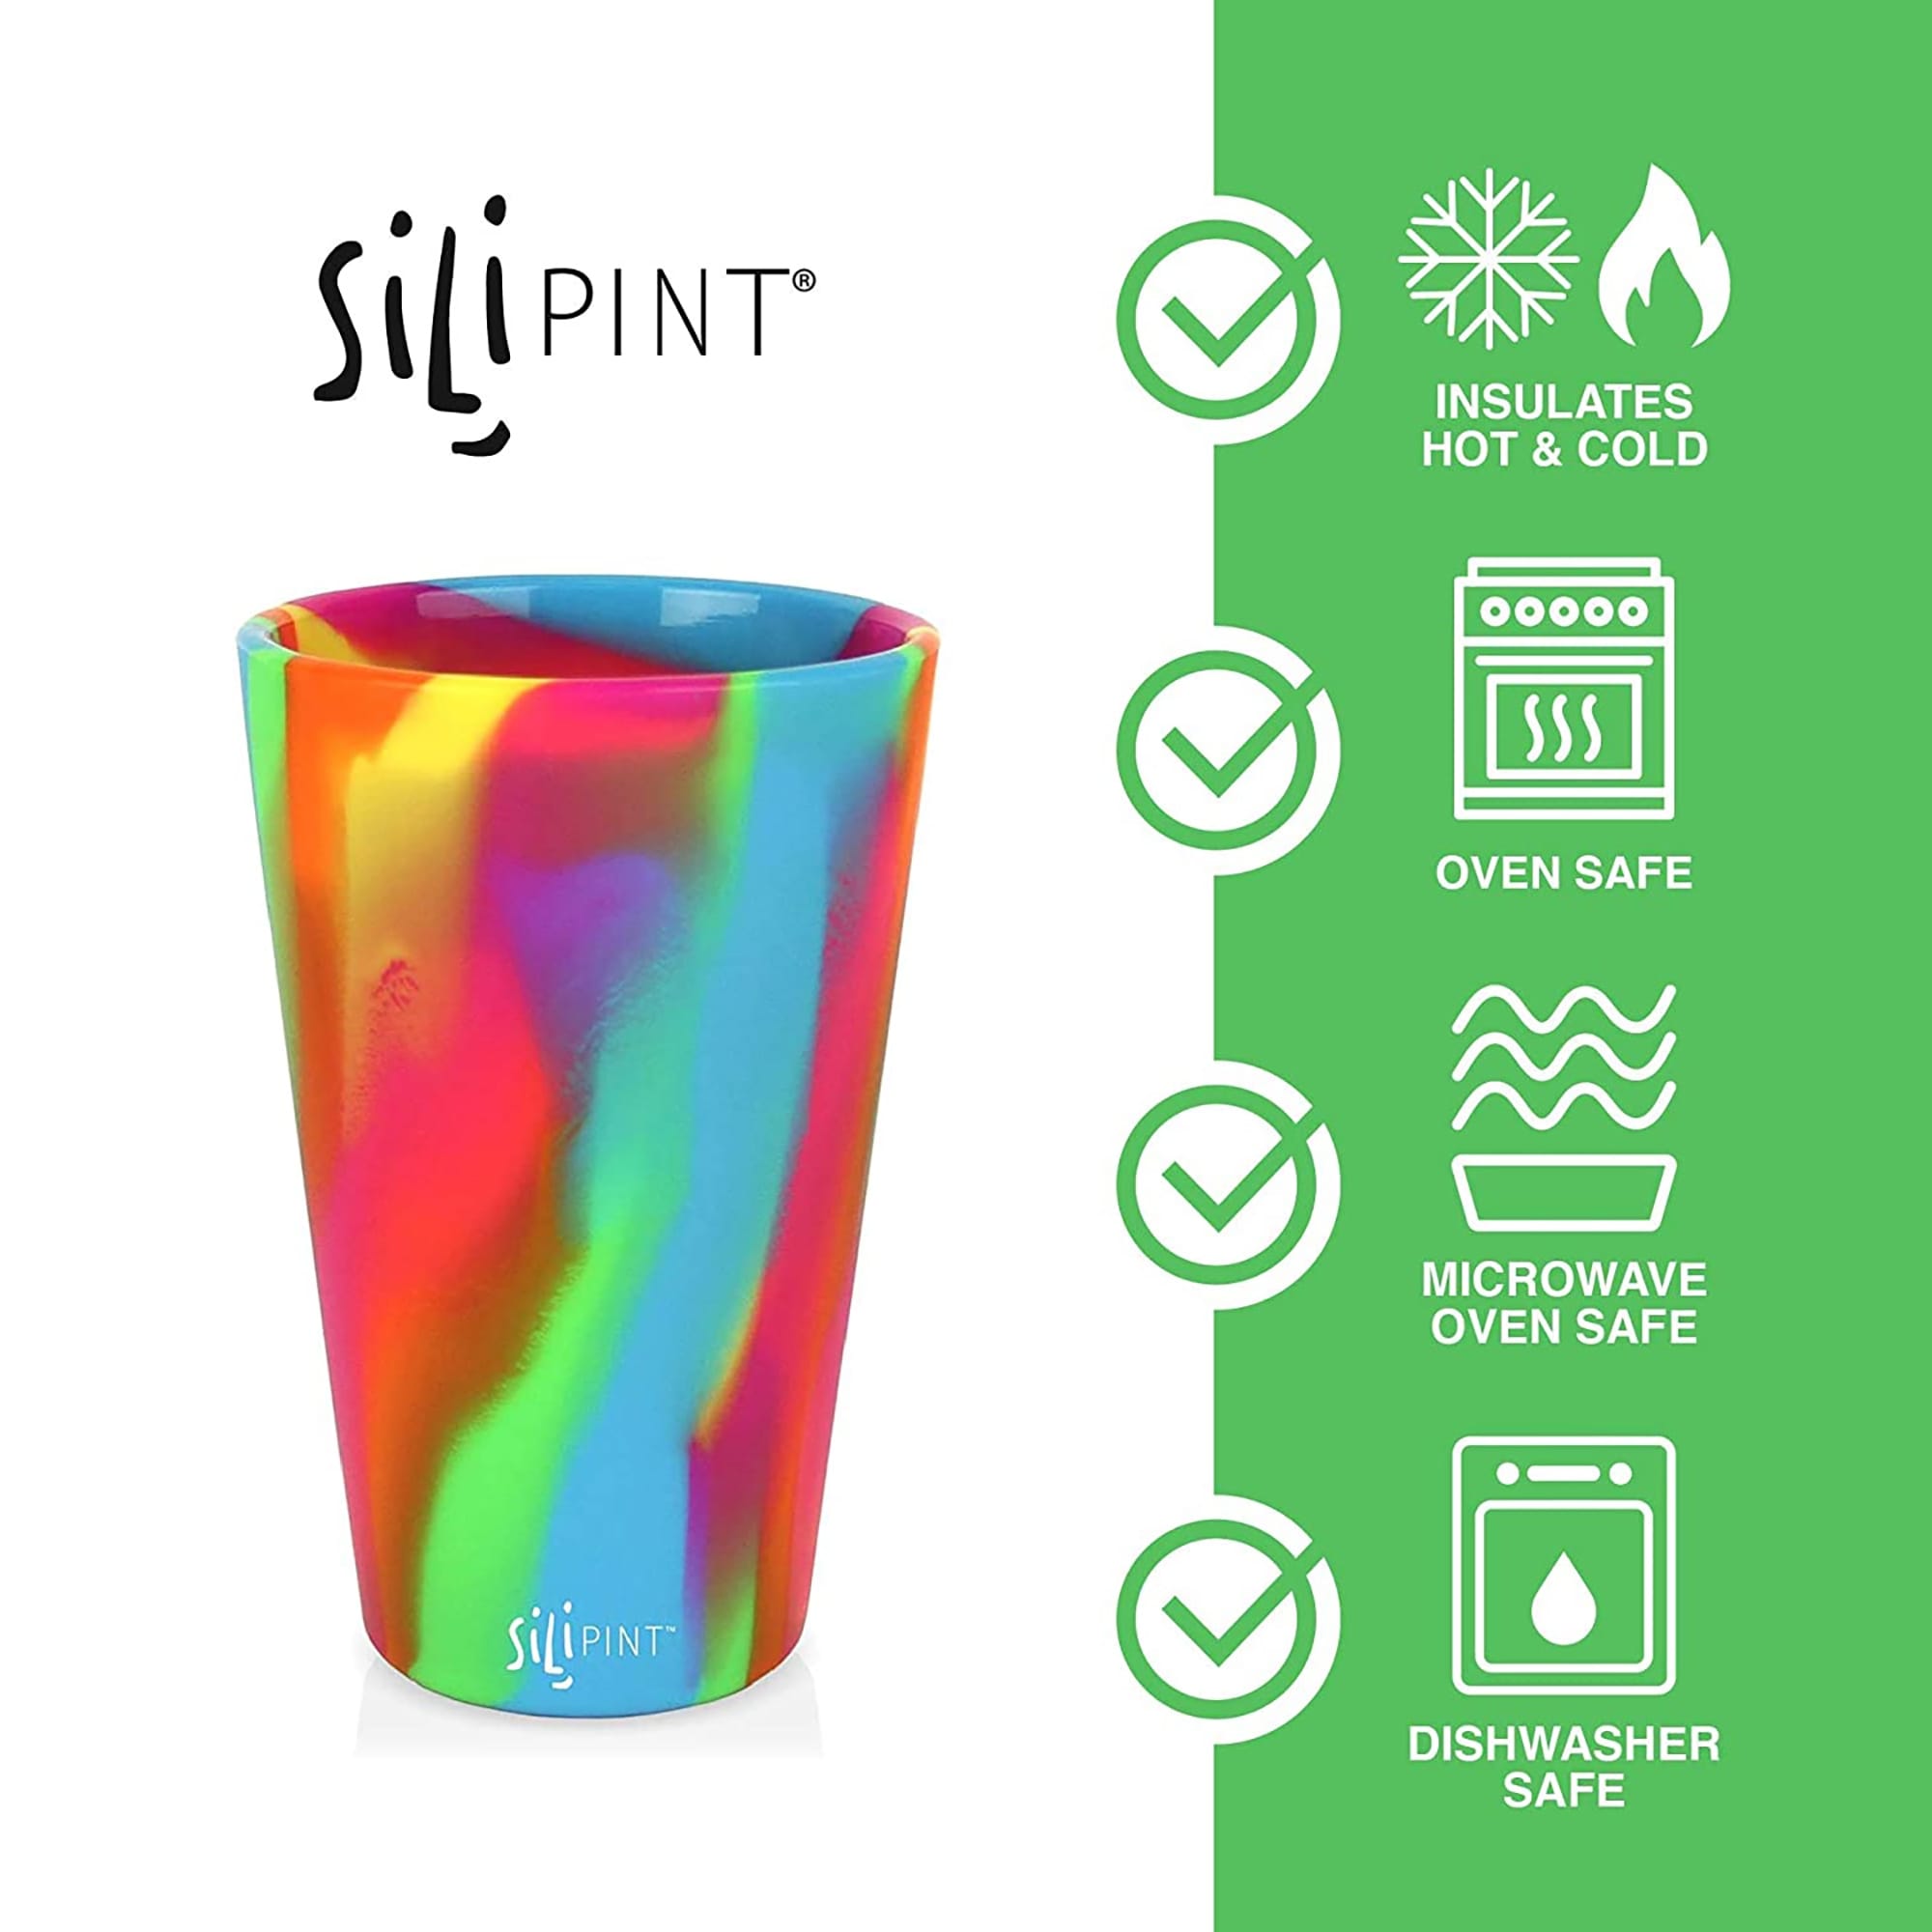 https://ak1.ostkcdn.com/images/products/is/images/direct/794fbe3f01a0e082fcf2abdf70aa1beaad782cb8/Silipint%3A-Silicone-Pint-Glasses%3A-2-Pack-Hippie-Hops---16oz-Unbreakable-Cups%2C-Flexible%2C-Hot-Cold%2C-Reusable%2C-Easy-Grip.jpg